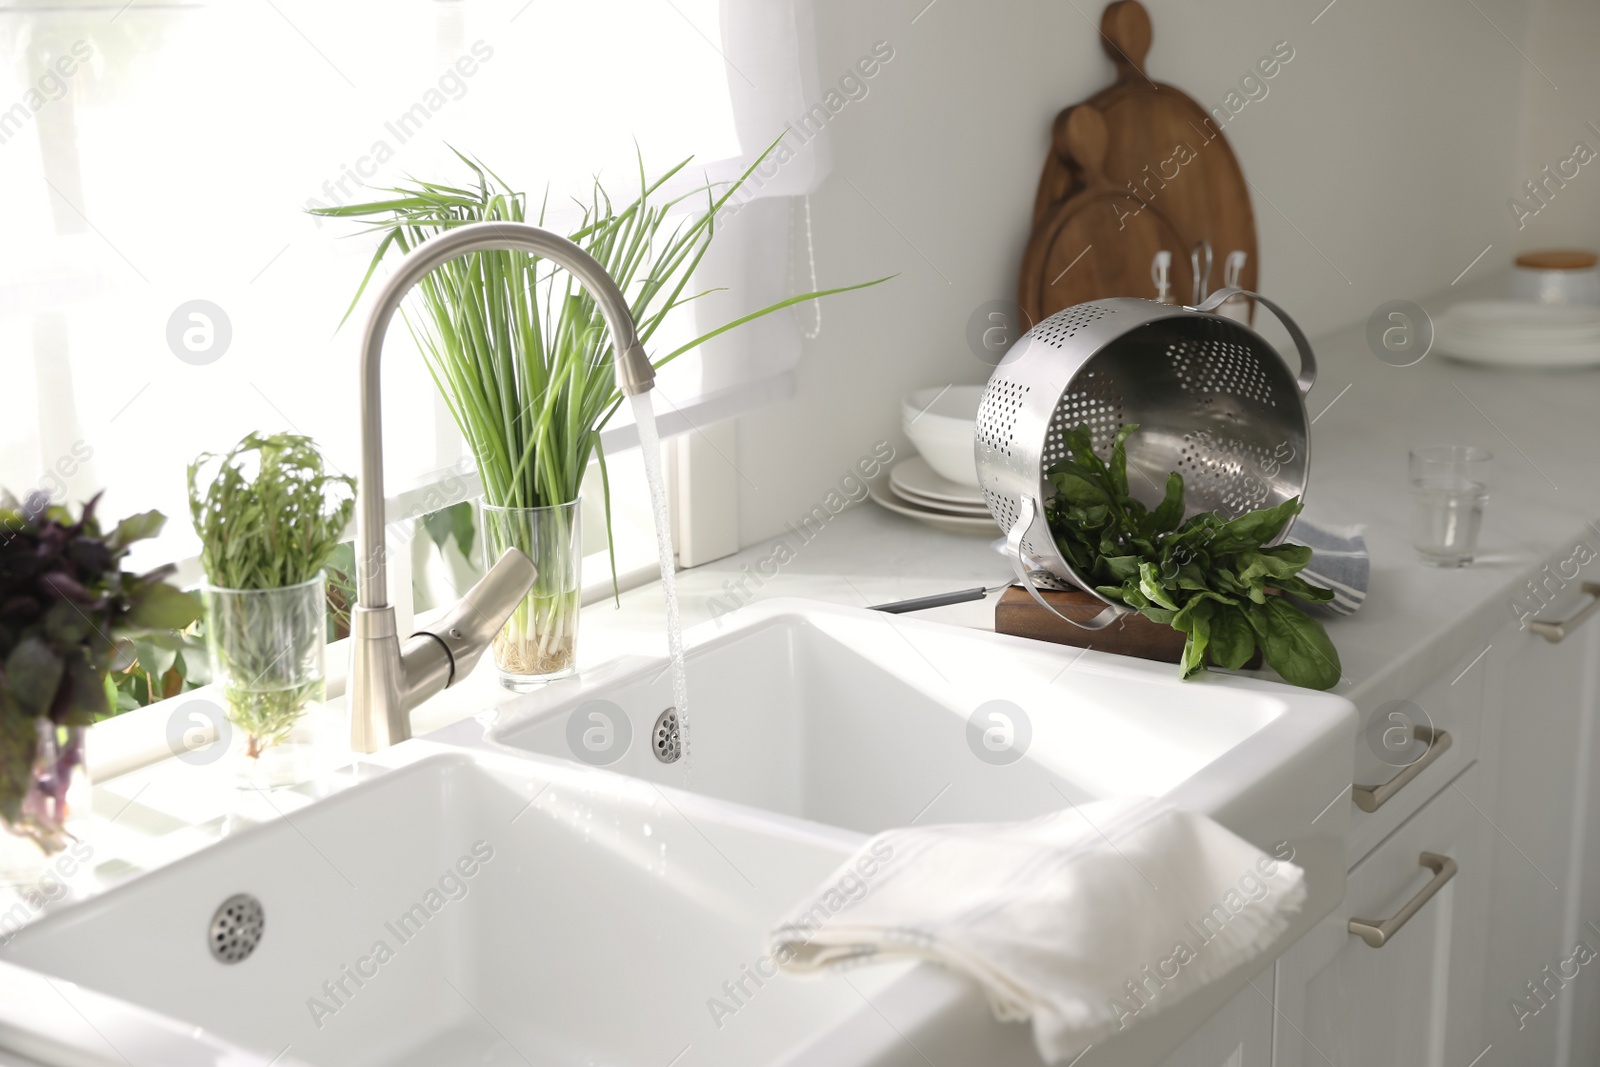 Photo of Colander with fresh spinach on countertop near sink in kitchen